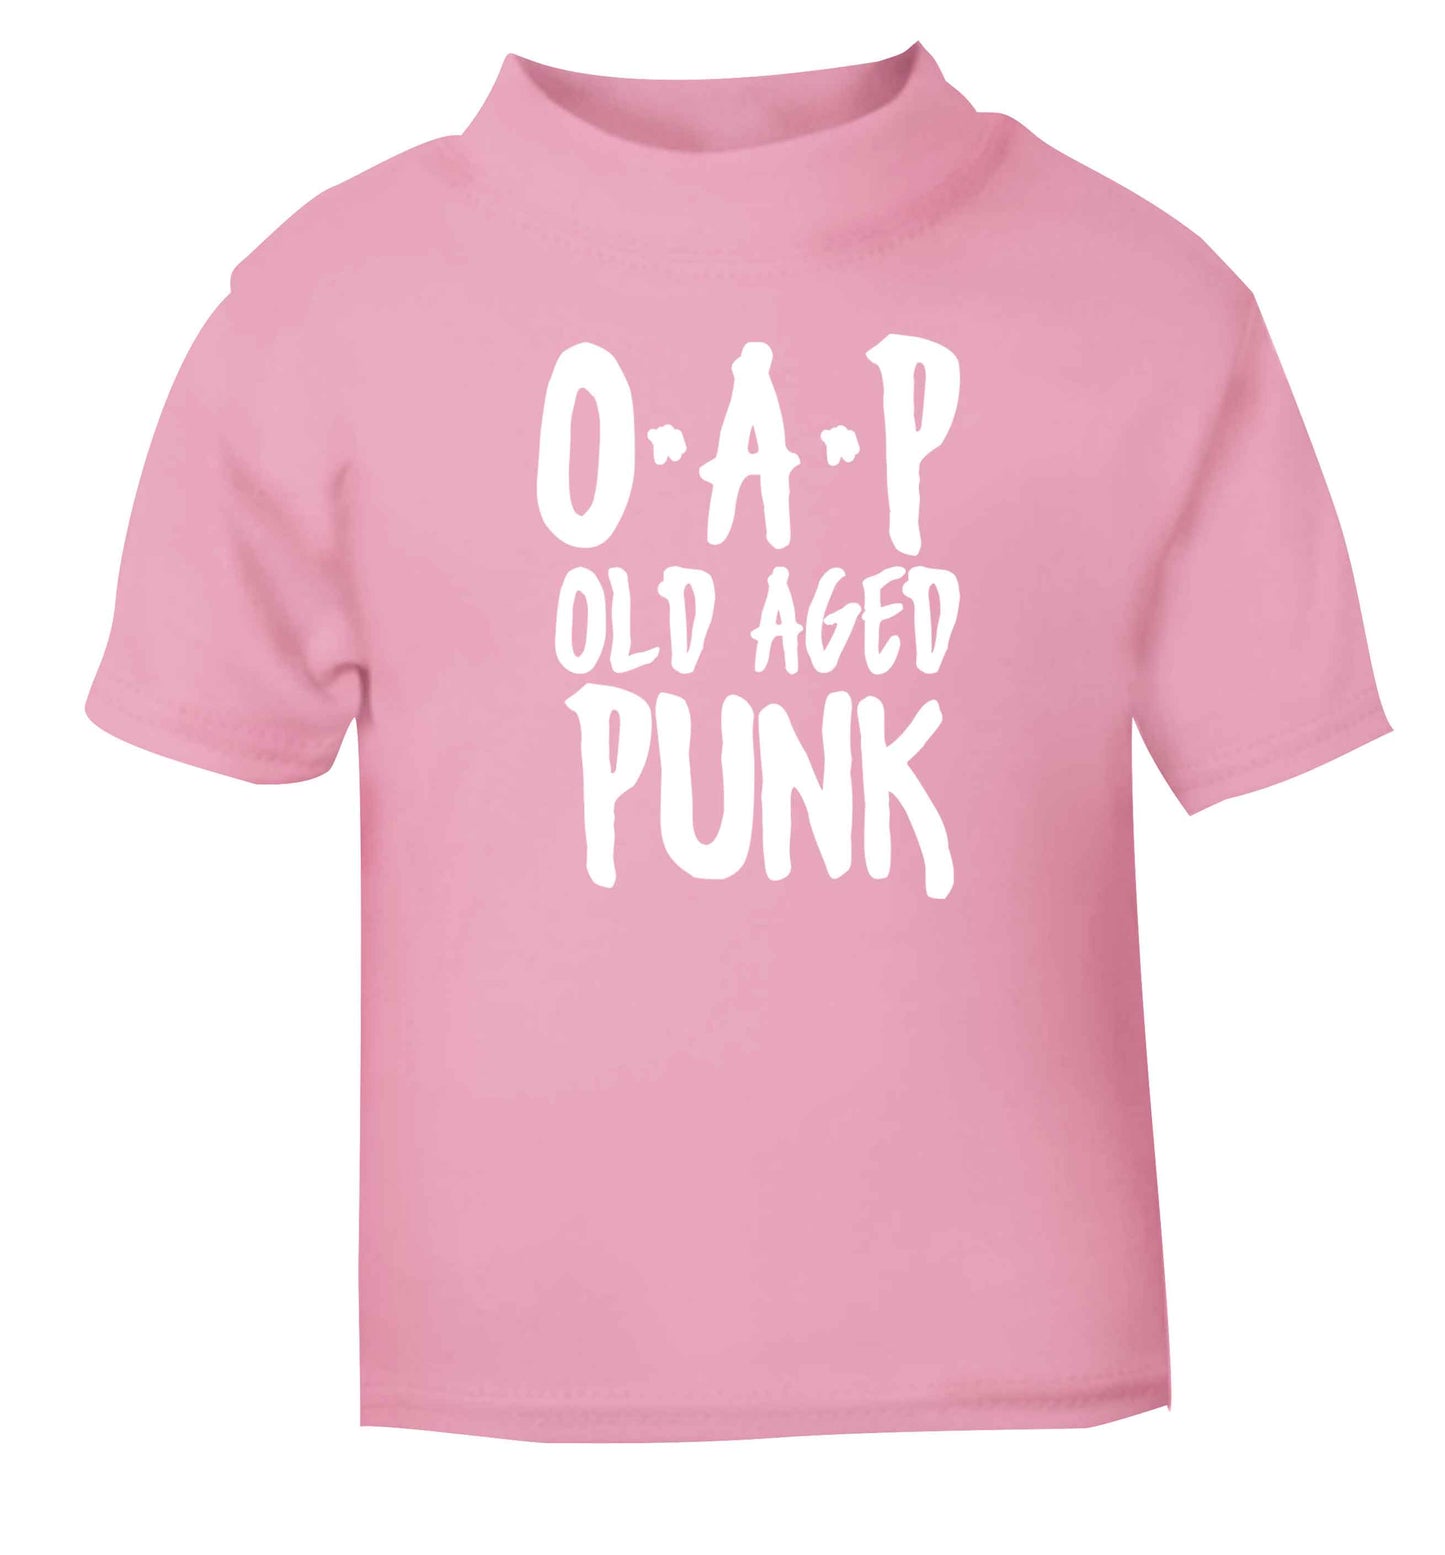 O.A.P Old Age Punk light pink Baby Toddler Tshirt 2 Years